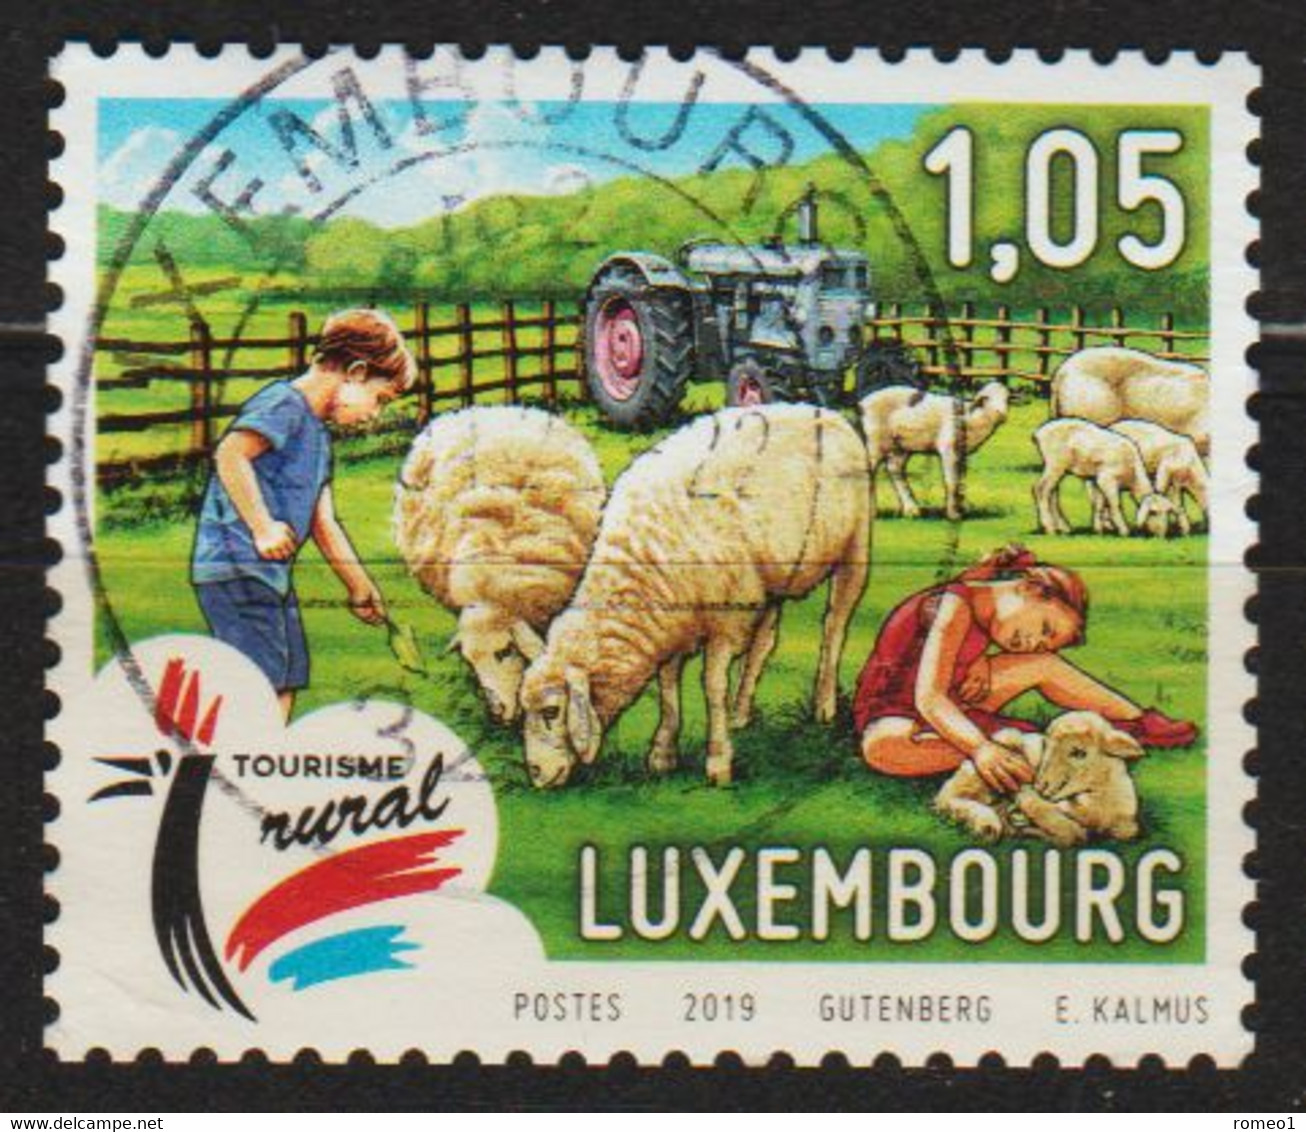 2019: Luxemburg Mi.Nr. 2204 Gest. / Luxembourg Y&T No. 2148 Obl. (d448) - Usados